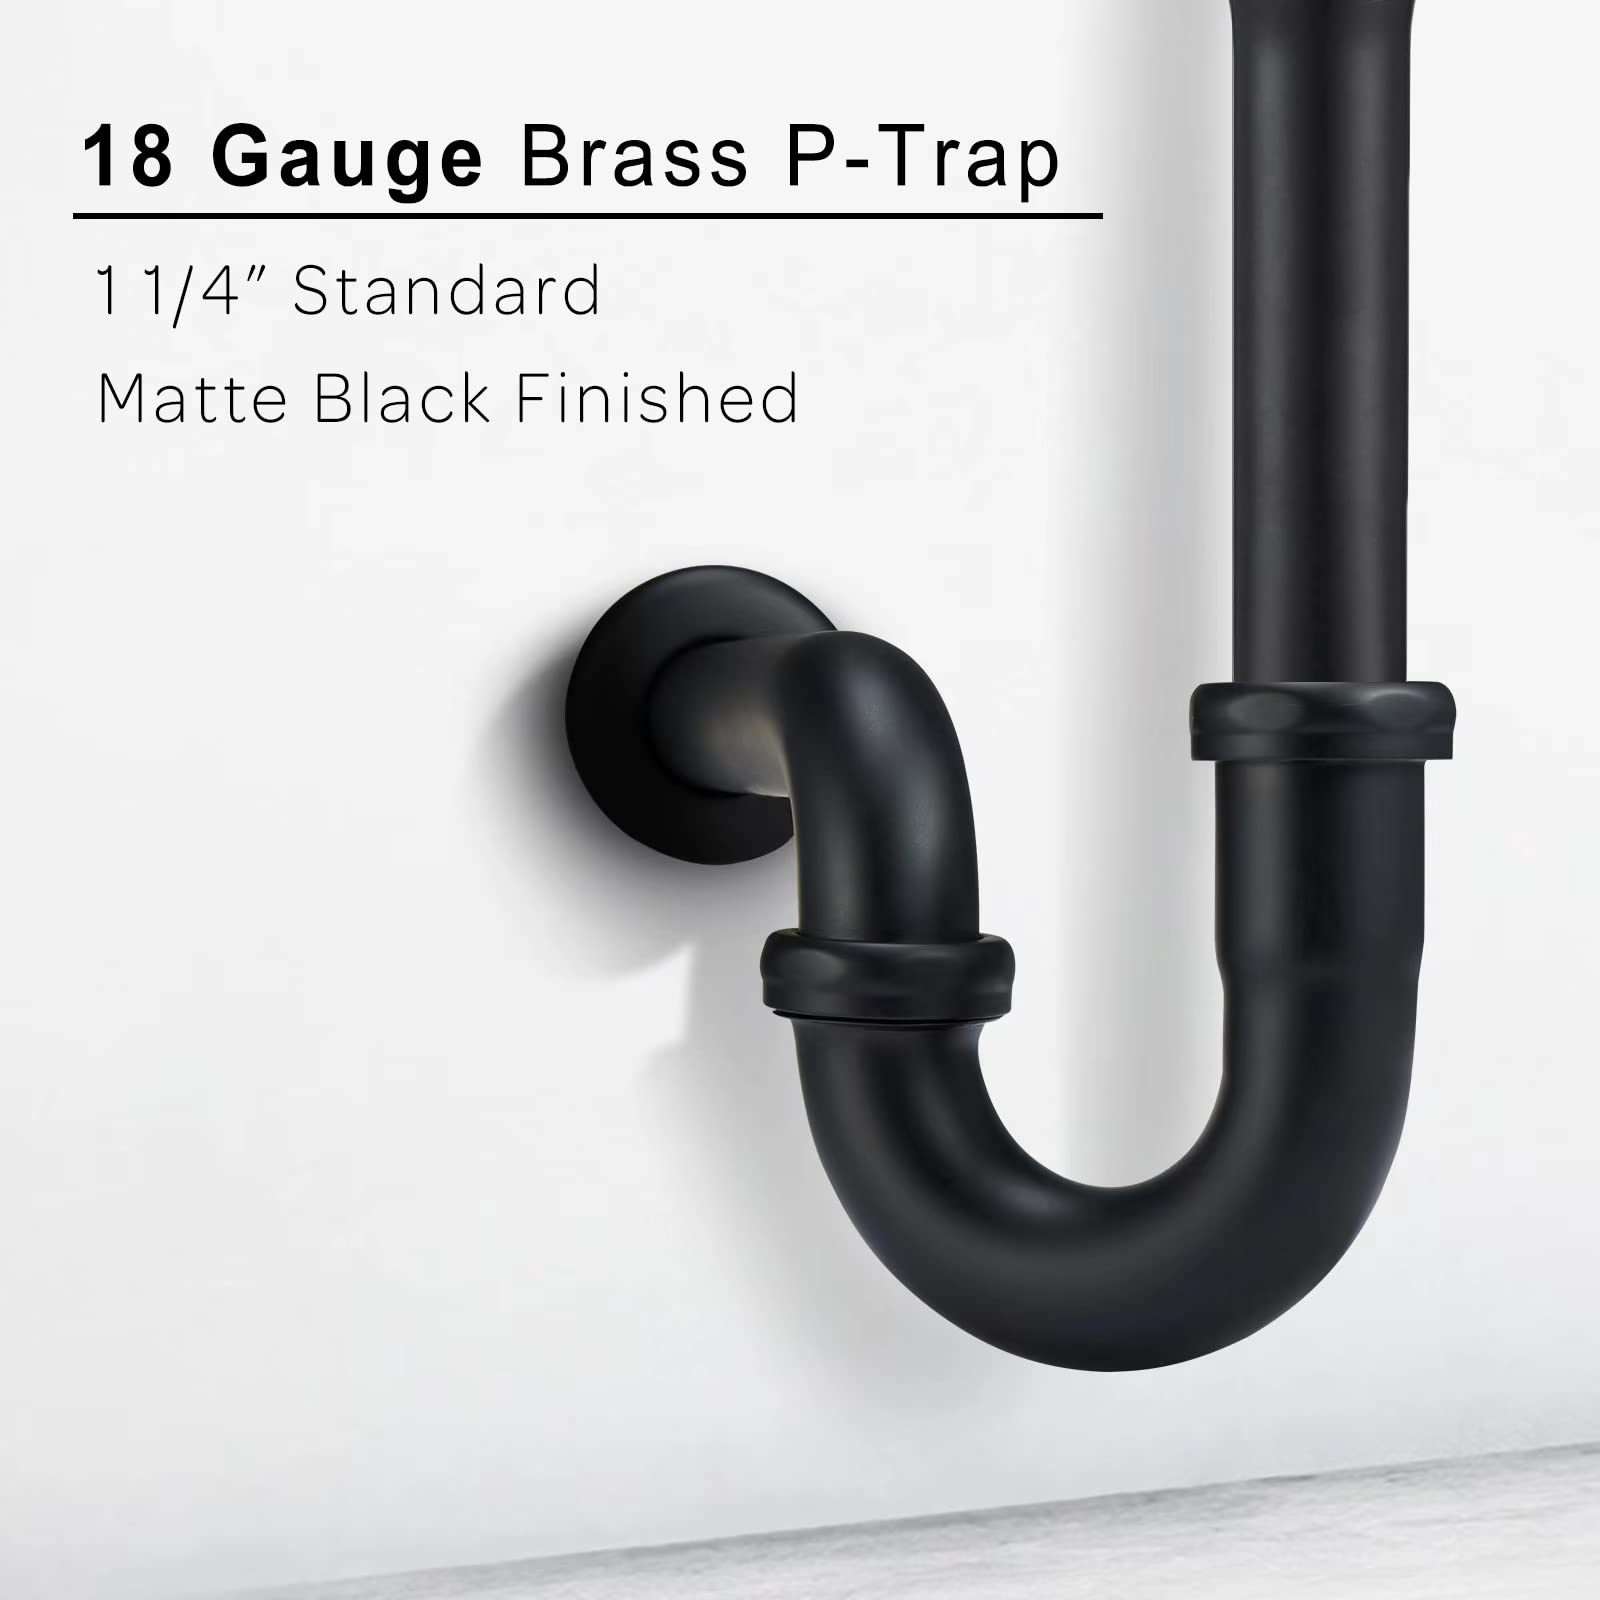 18 Gauge Solid Brass P-Trap 1 1/4” OD, Heavy Duty Brass Tubular J Bend Pipe Connector, Decorative Bathroom Basin Sink Waste Trap Drain Kit with Flange and Gasket Washers, Matte Black